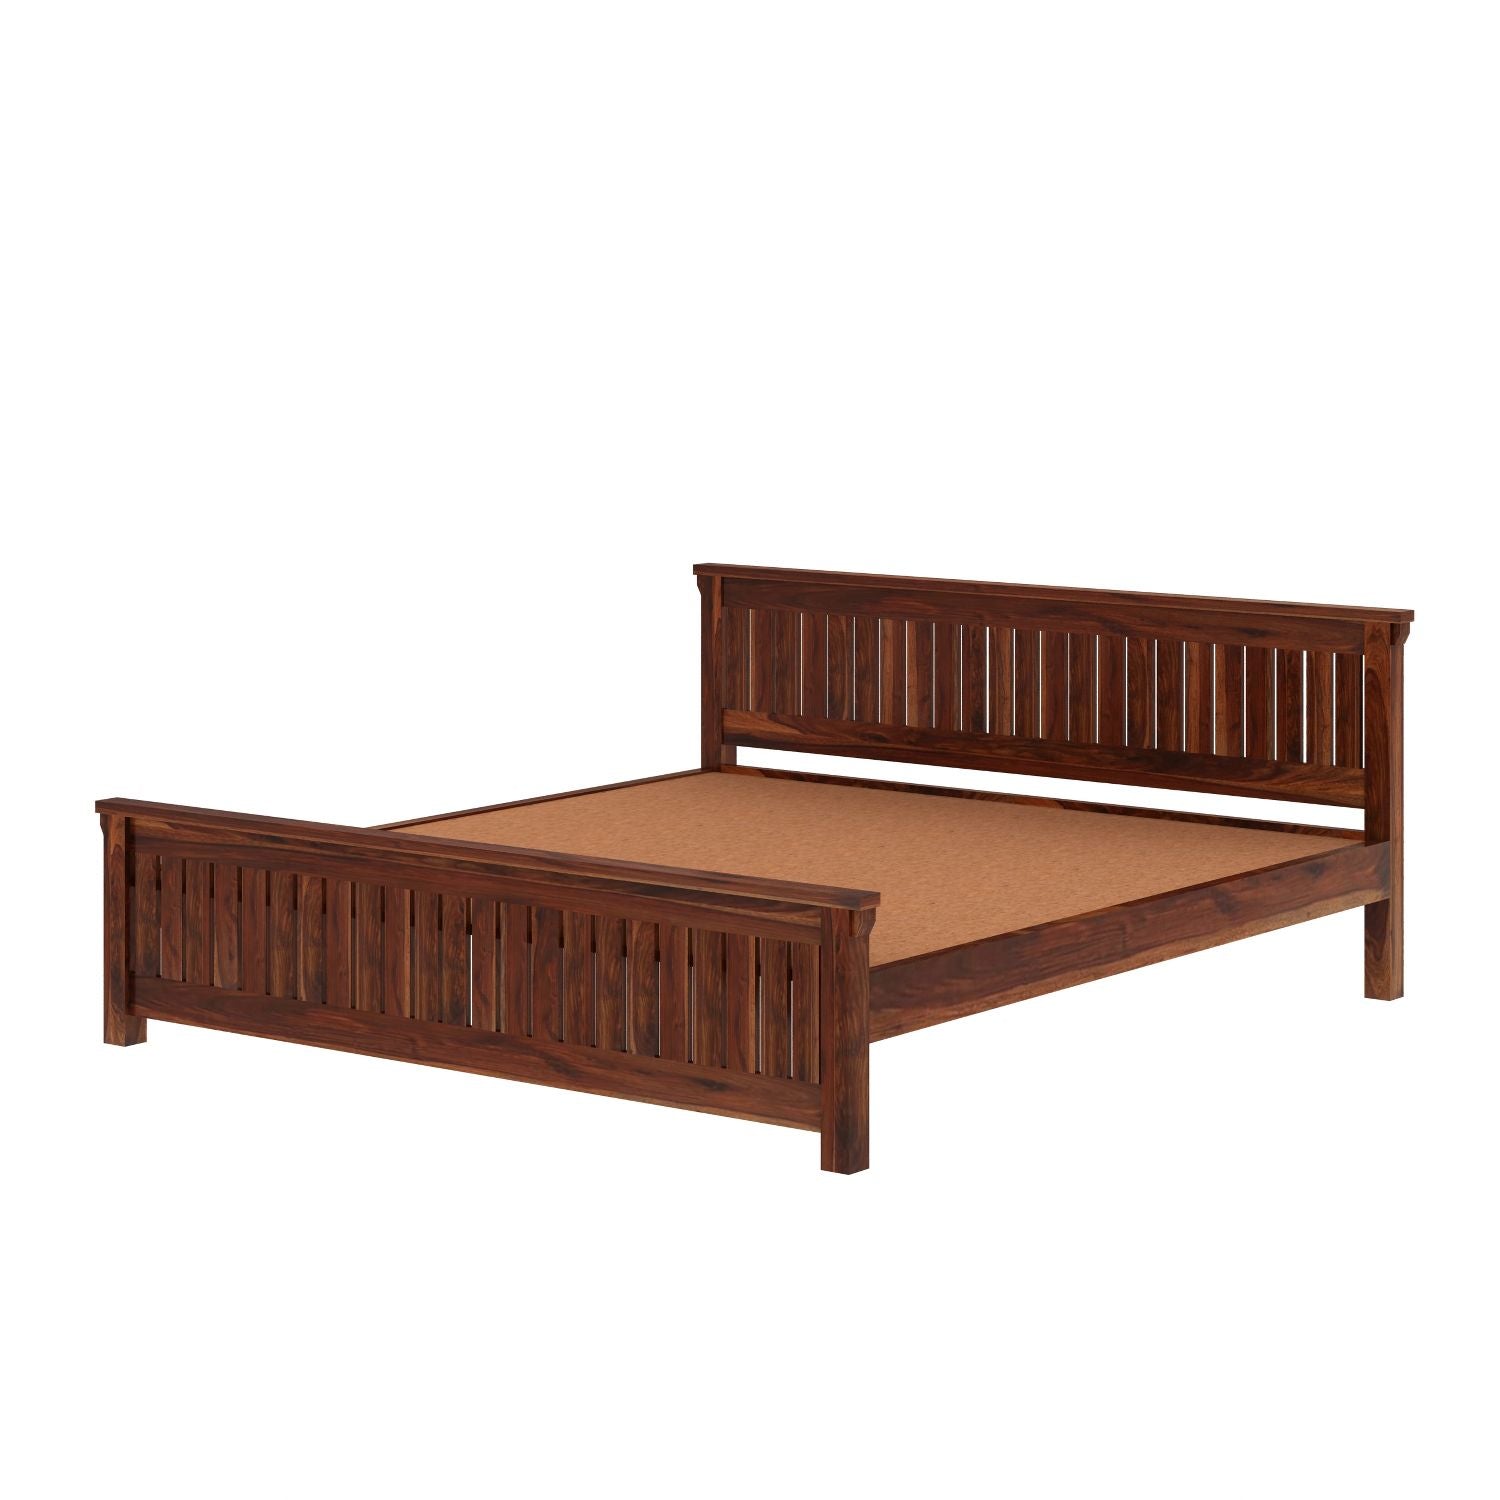 Trinity Solid Sheesham Wood Bed Without Storage (Queen Size, Natural Finish)